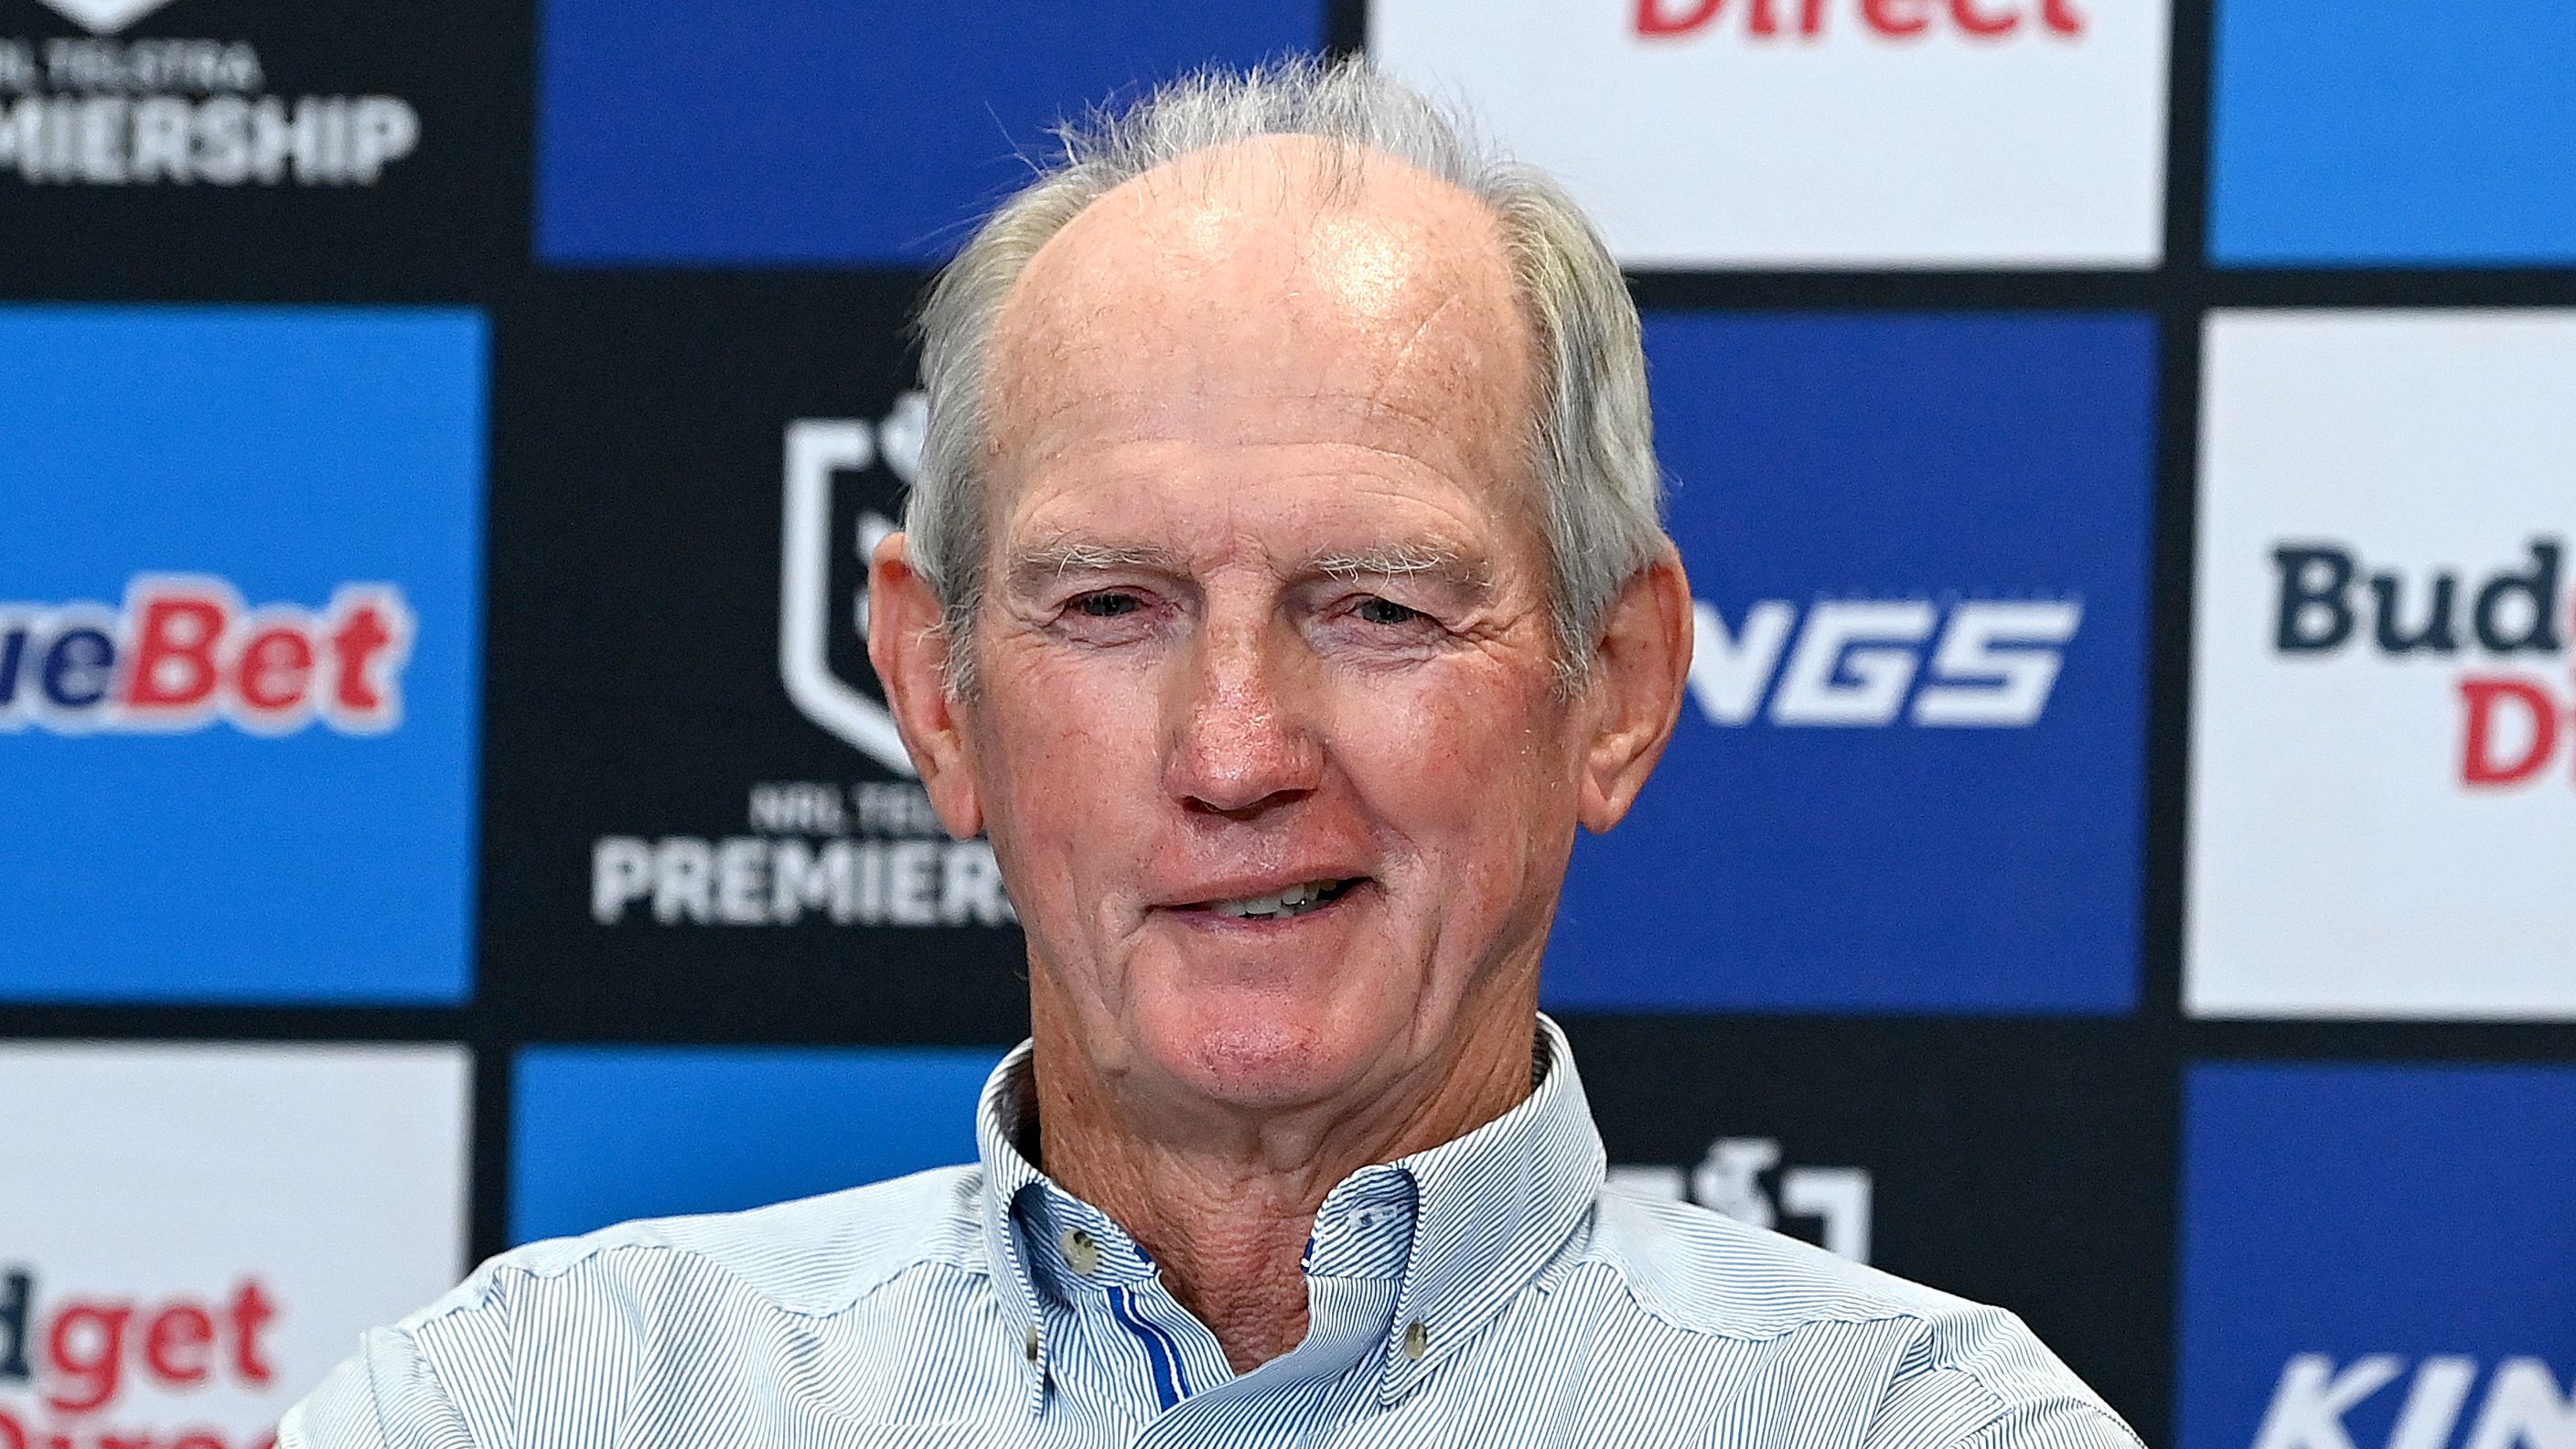 BRISBANE, AUSTRALIA - APRIL 23: Coach Wayne Bennett of the Dolphins gives a smile at a post match press conference after the round eight NRL match between the Dolphins and Gold Coast Titans at Suncorp Stadium on April 23, 2023 in Brisbane, Australia. (Photo by Bradley Kanaris/Getty Images)